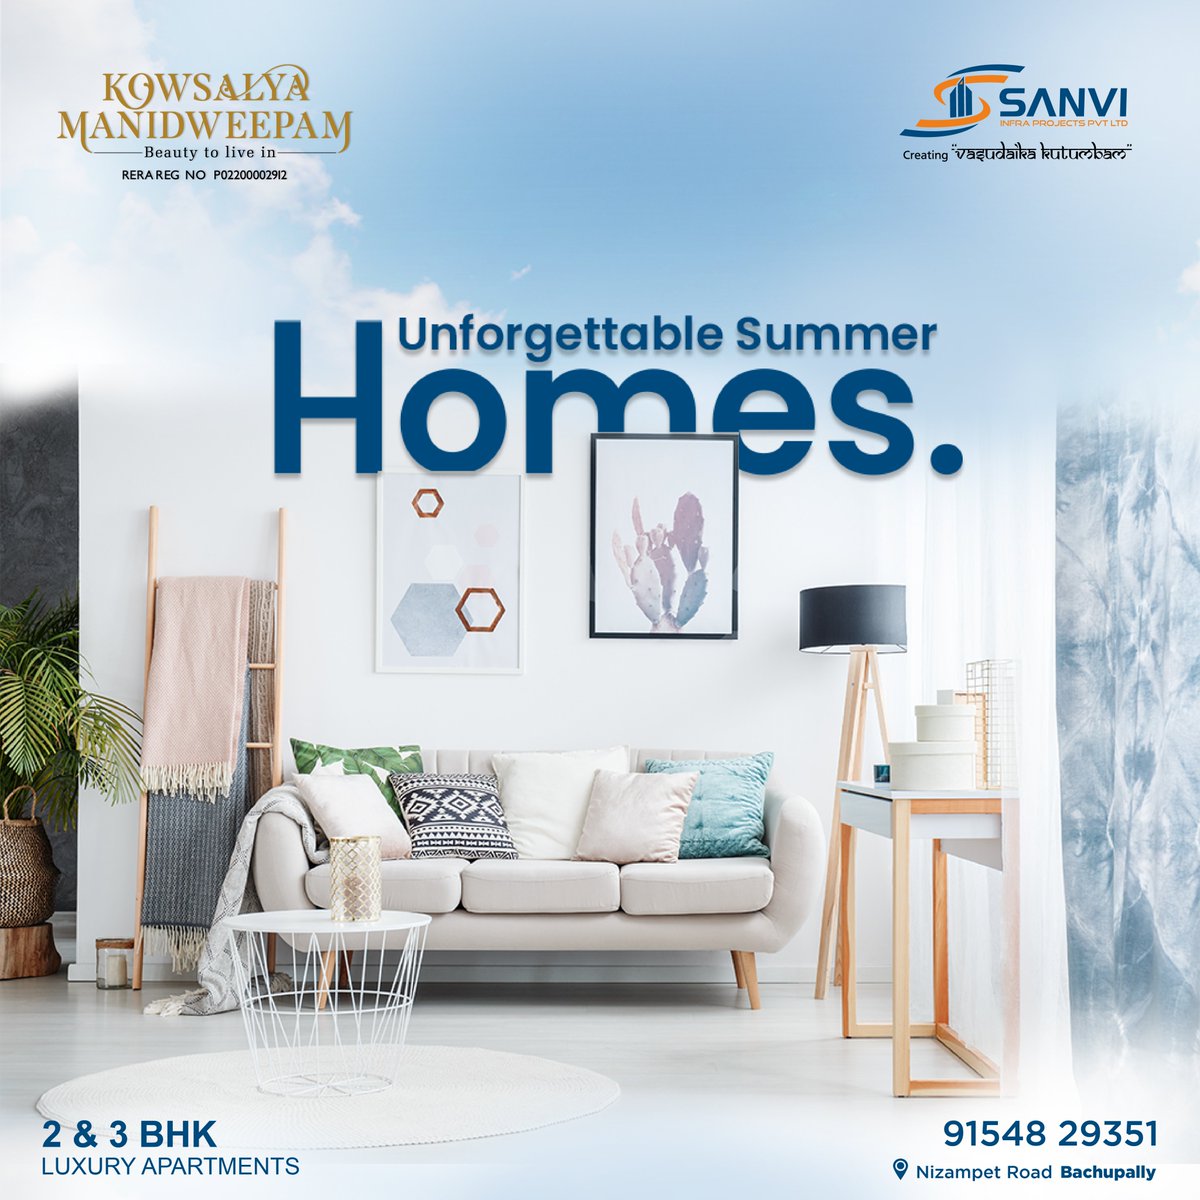 Every home is built with ultimate architecture and design, giving you the perfection you deserve for every season and every moment. 
#sanviinfra #kowsalyamanidweepam #Nizampet #Bachupally #home  #property #2and3bhkflats #2and3BHKApartments #2BHKApartments #3bhkapartments